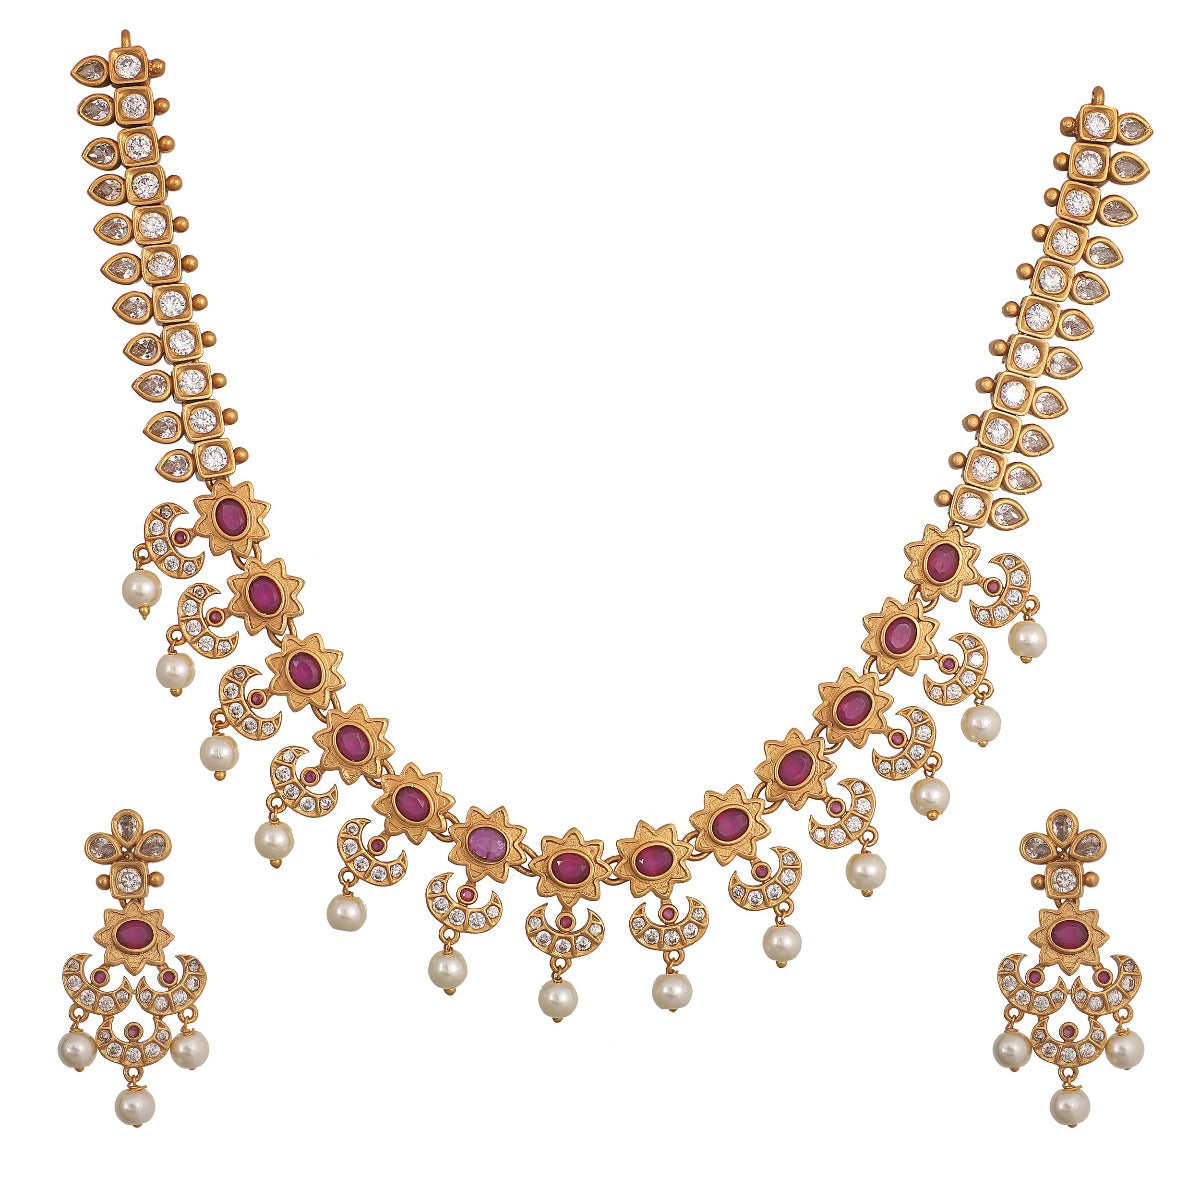 Antique Gold Plated Kalika Necklace Earrings Set